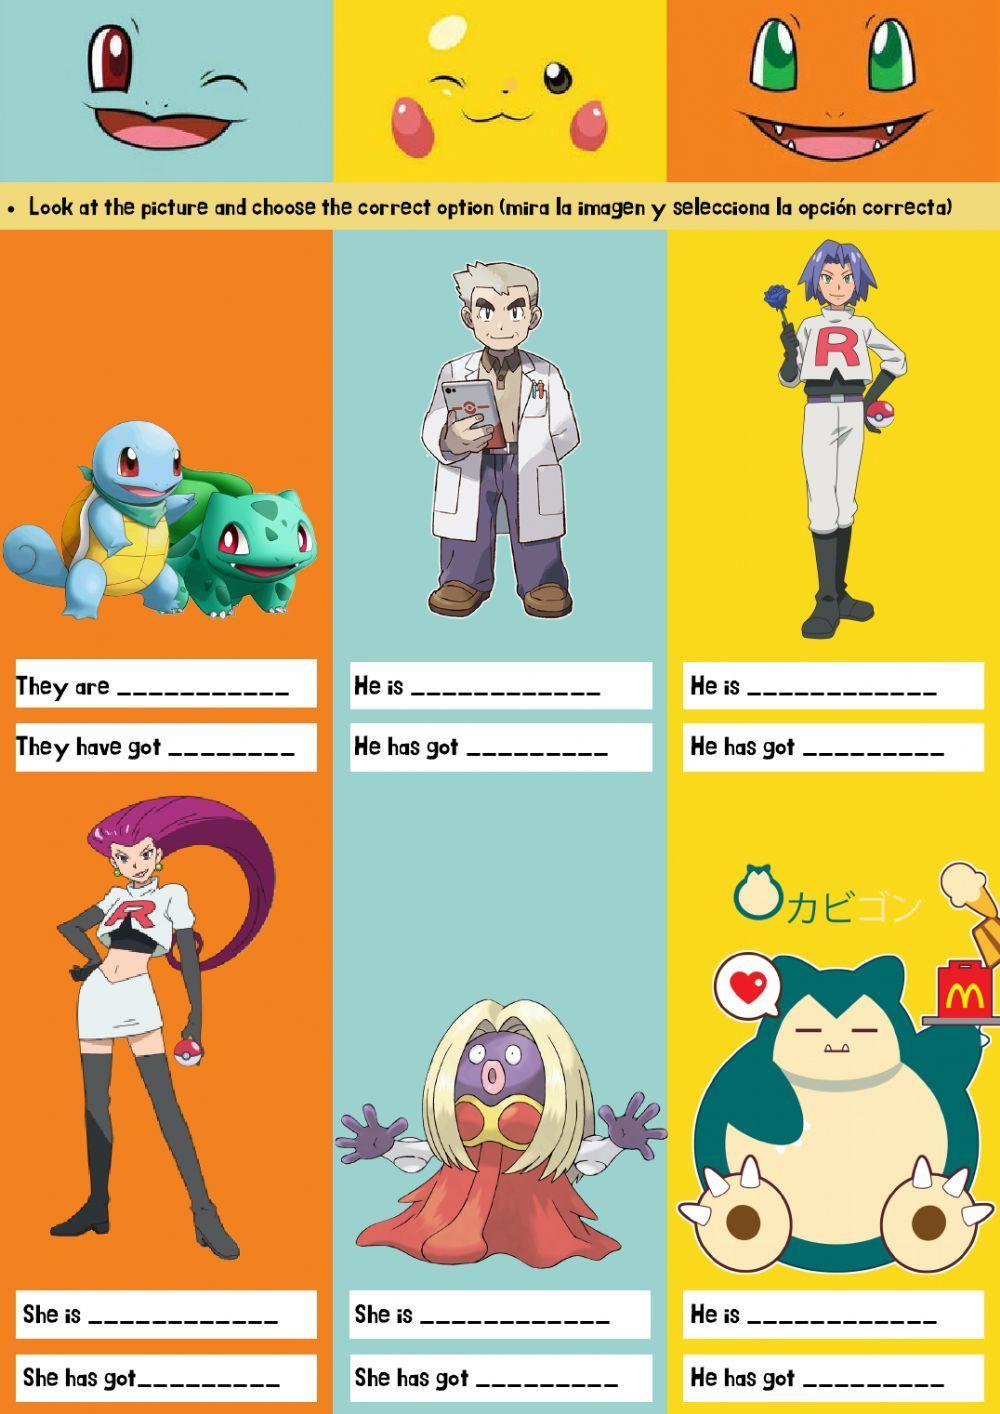 Let's describe Pokemon characters!